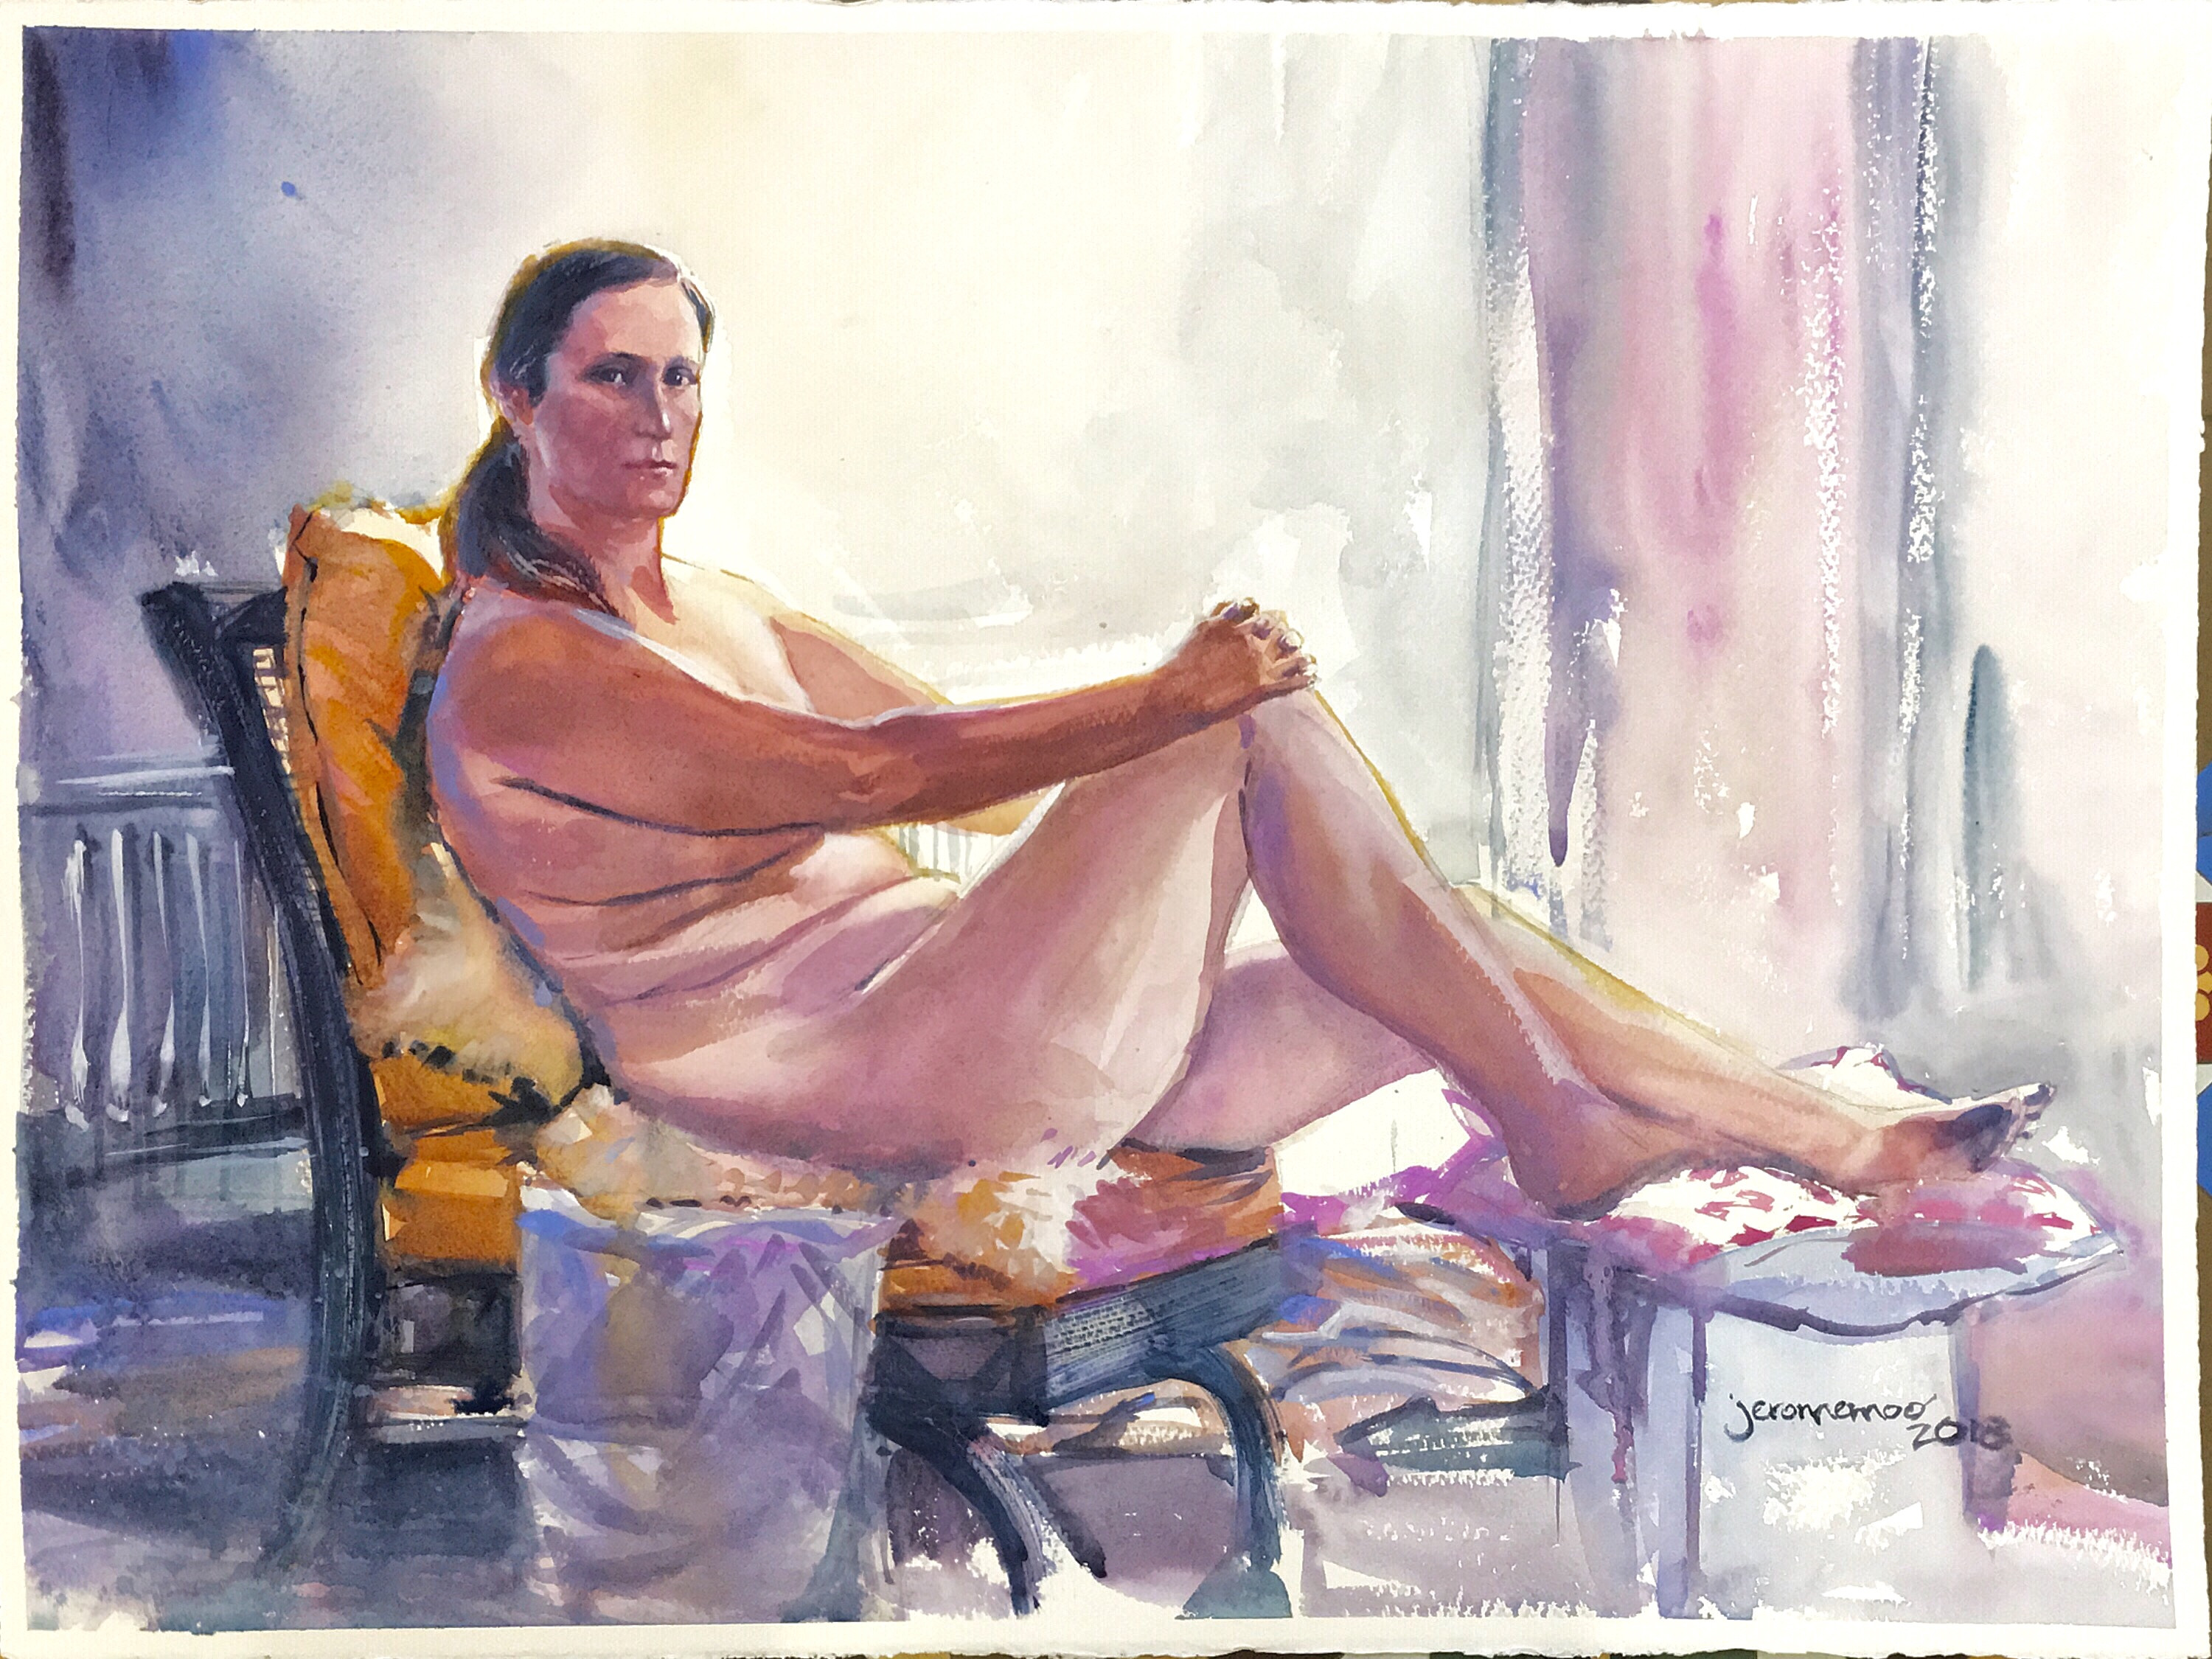 Long Pose Life Drawing of Catherine
Watercolour on 56x76cm 425gsm Rough Saunders Waterford Watercolour Paper